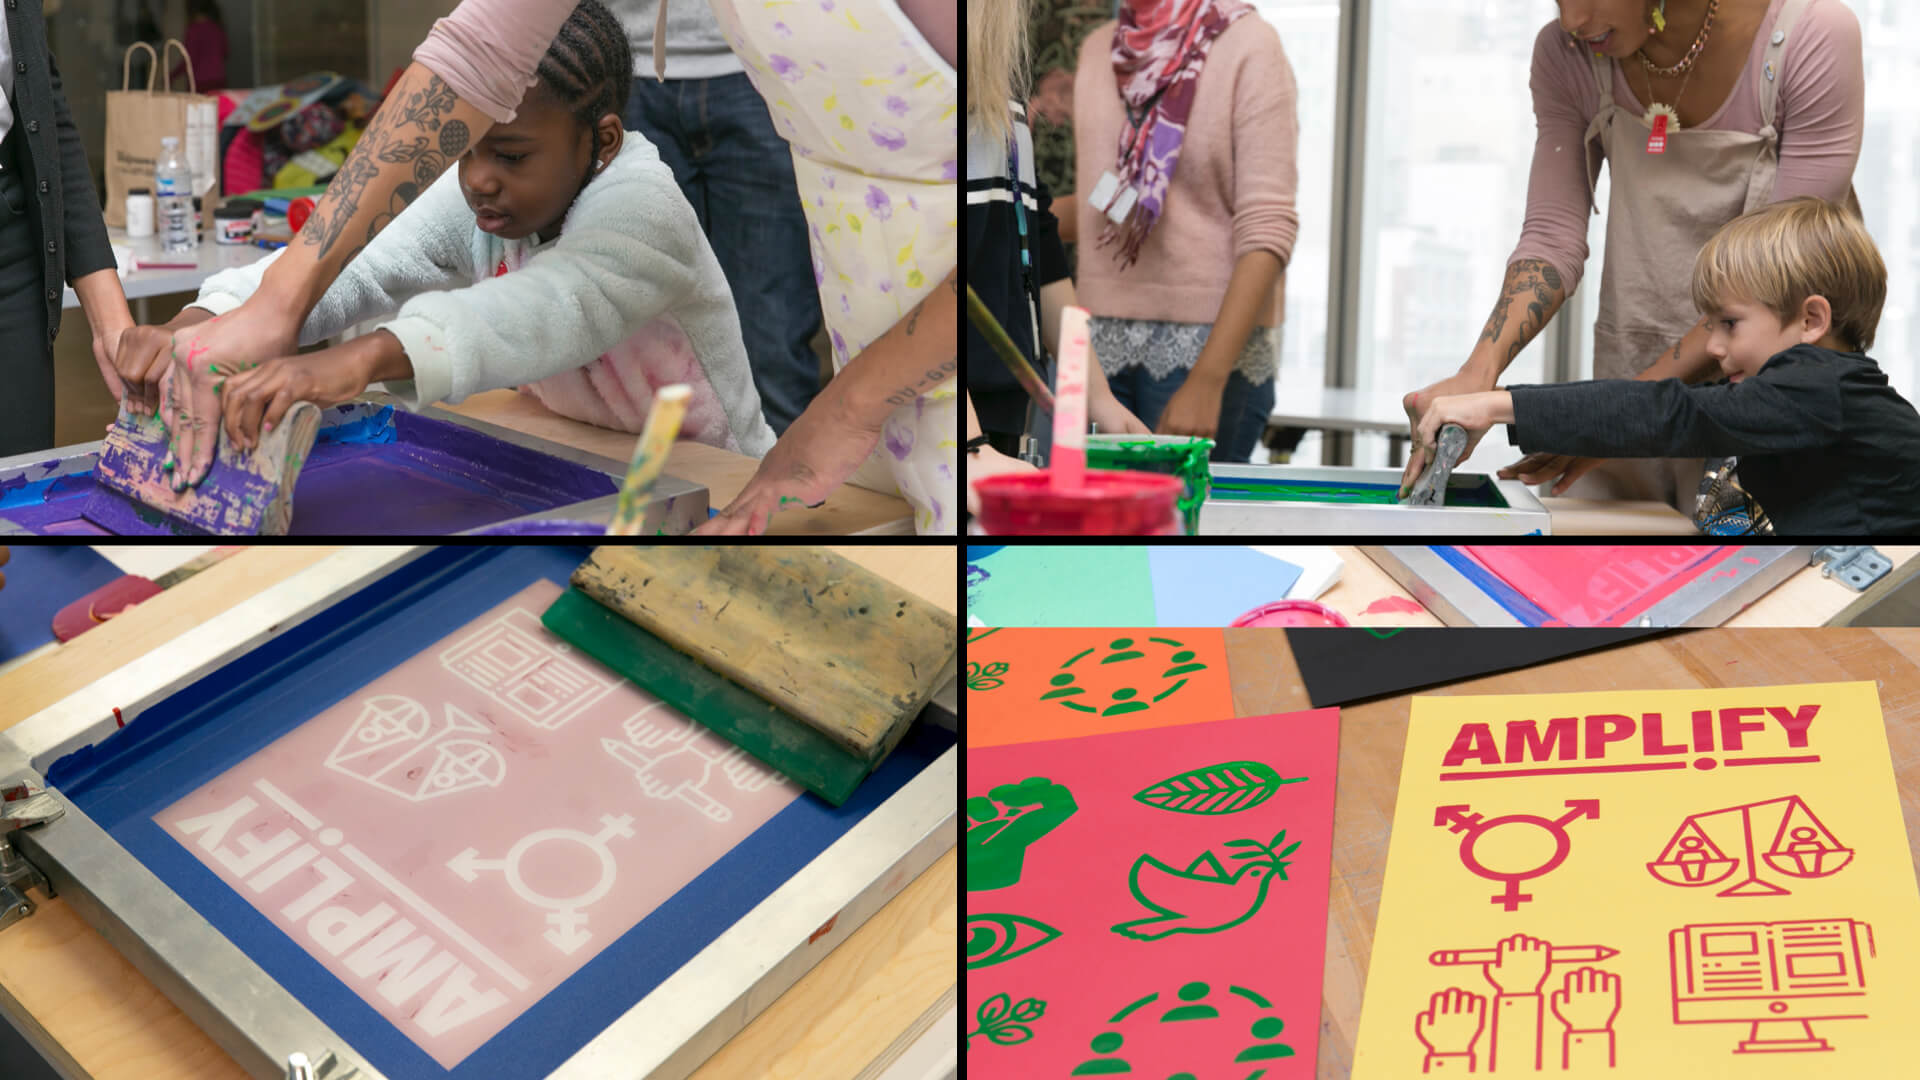 four images portray a screen printing workshop for children